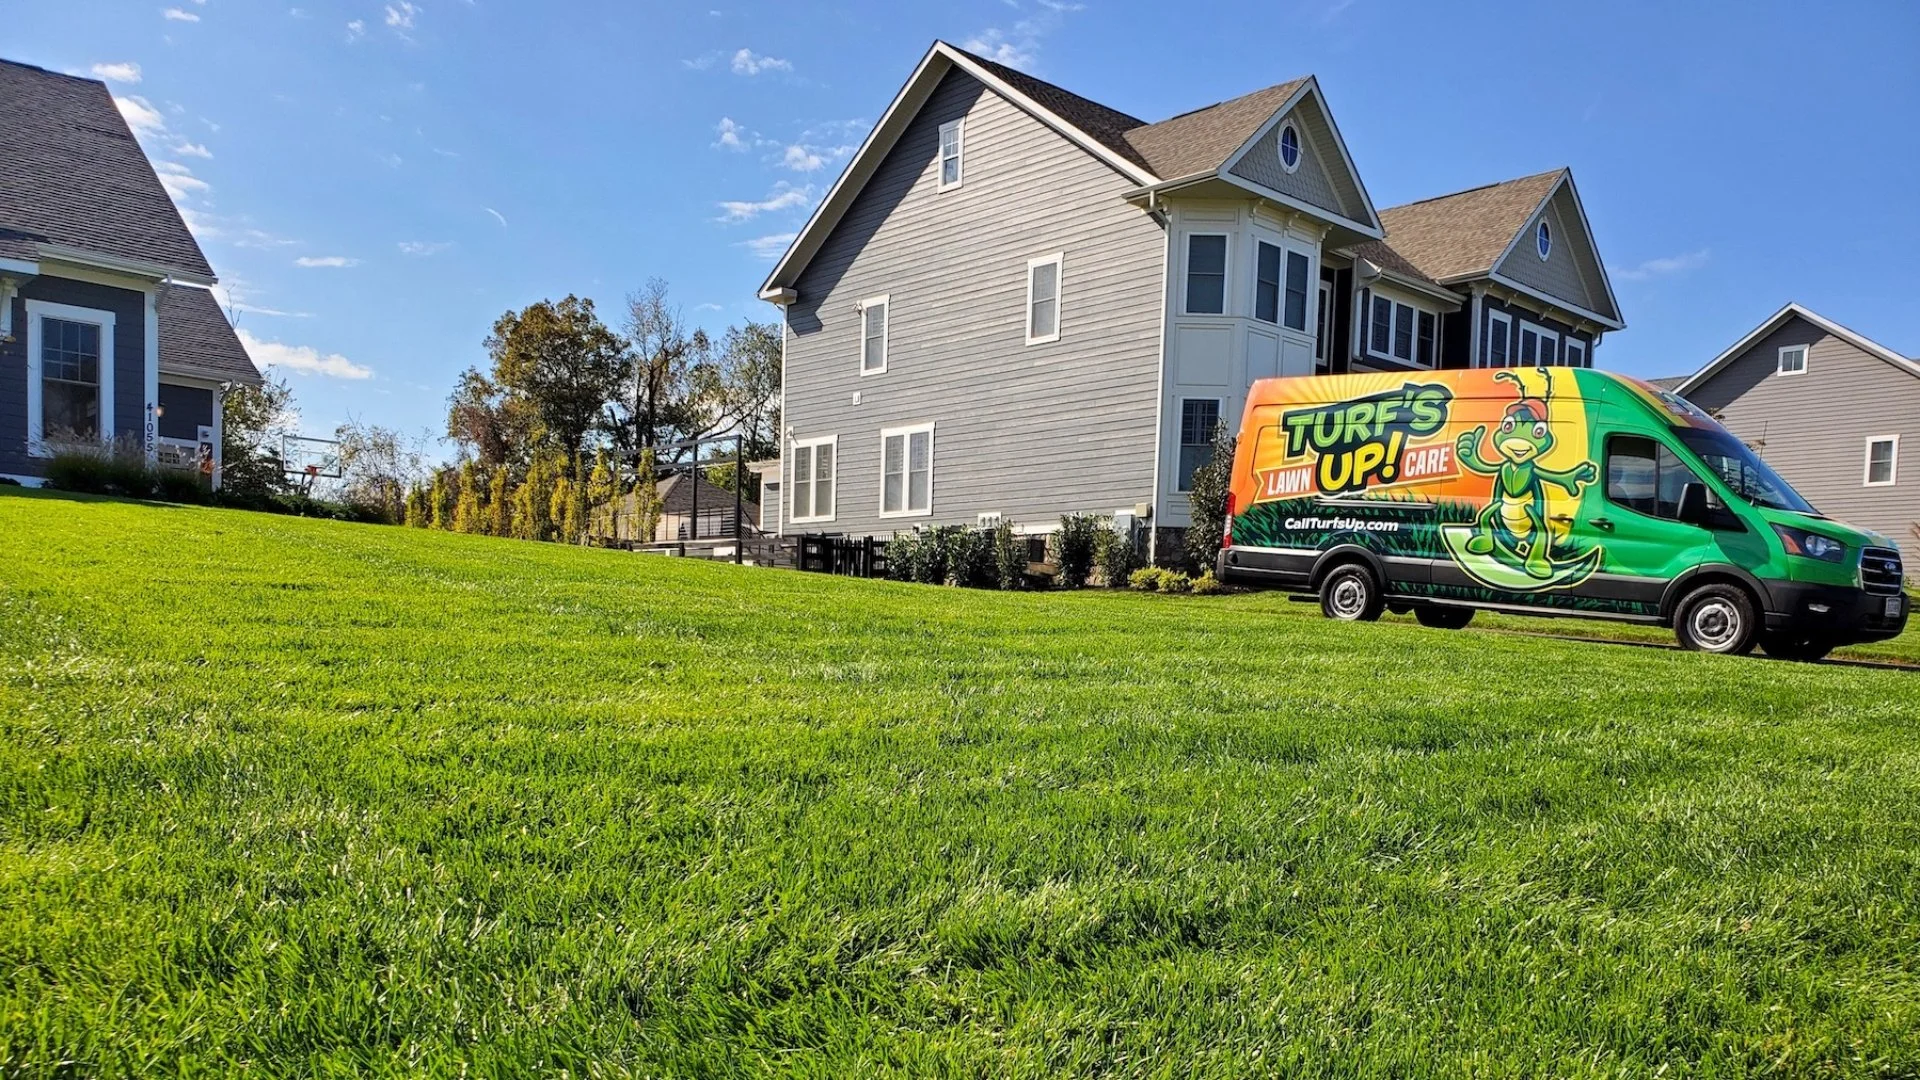 Turf's Up Lawn Care truck at customer's property.